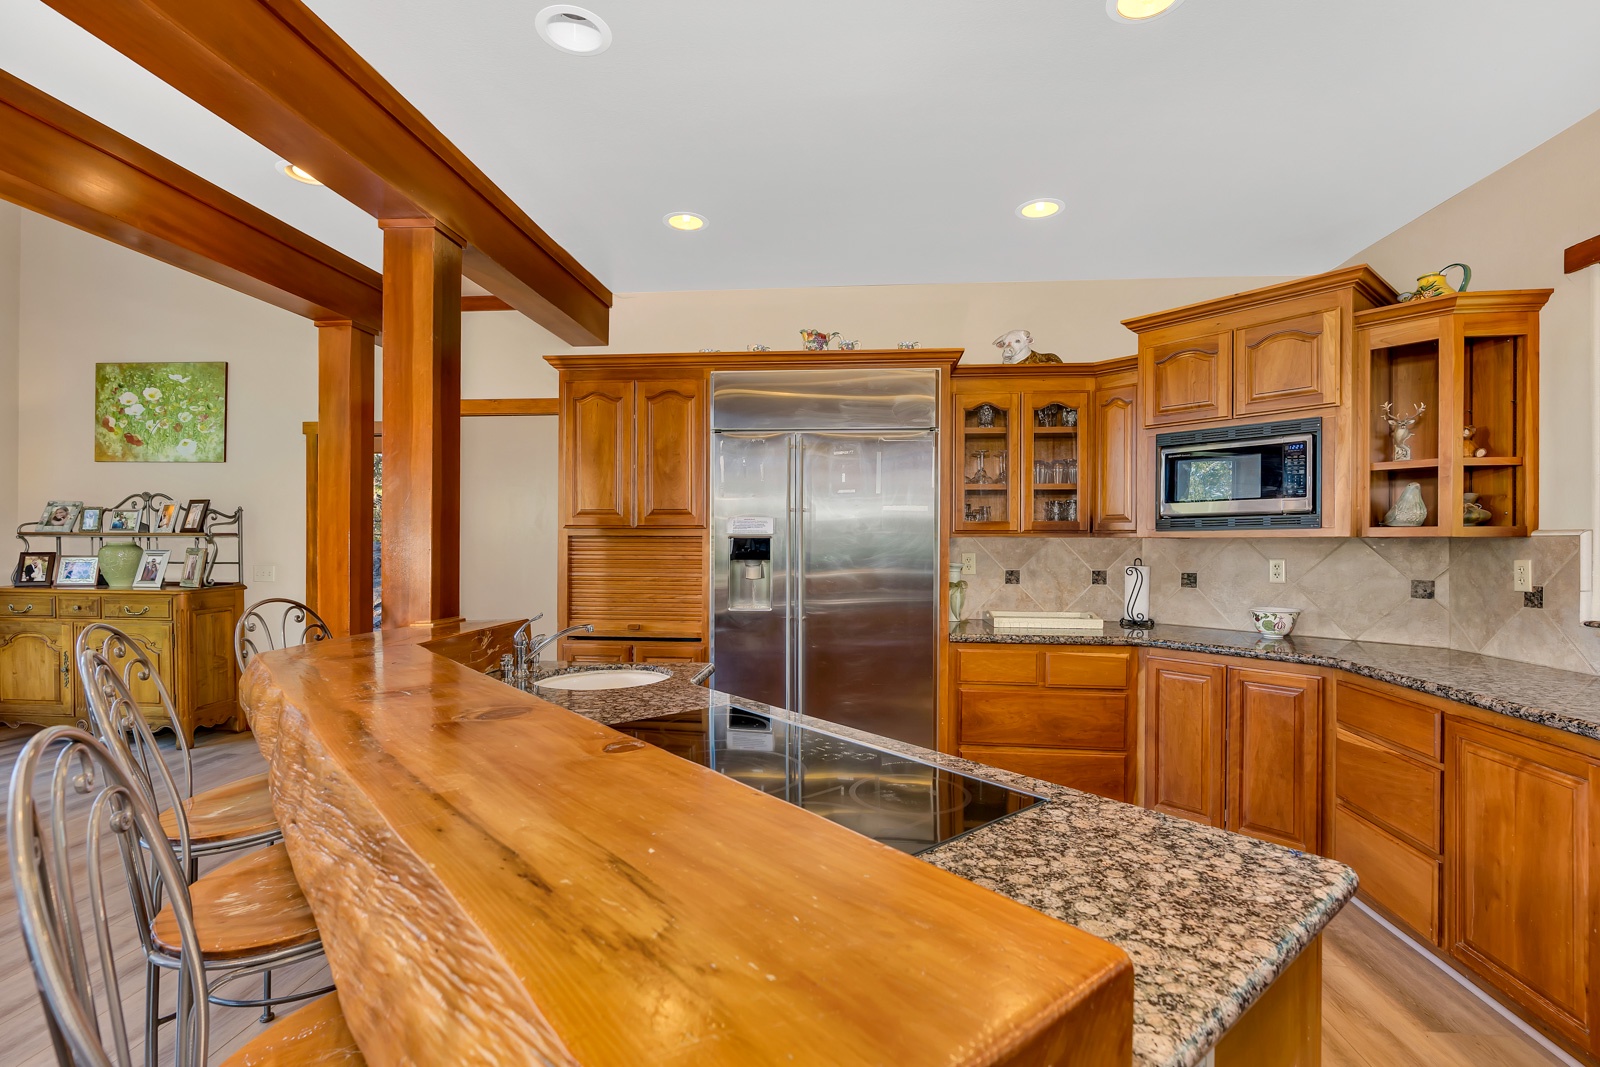 The beautiful kitchen offers ample space & all the comforts of home